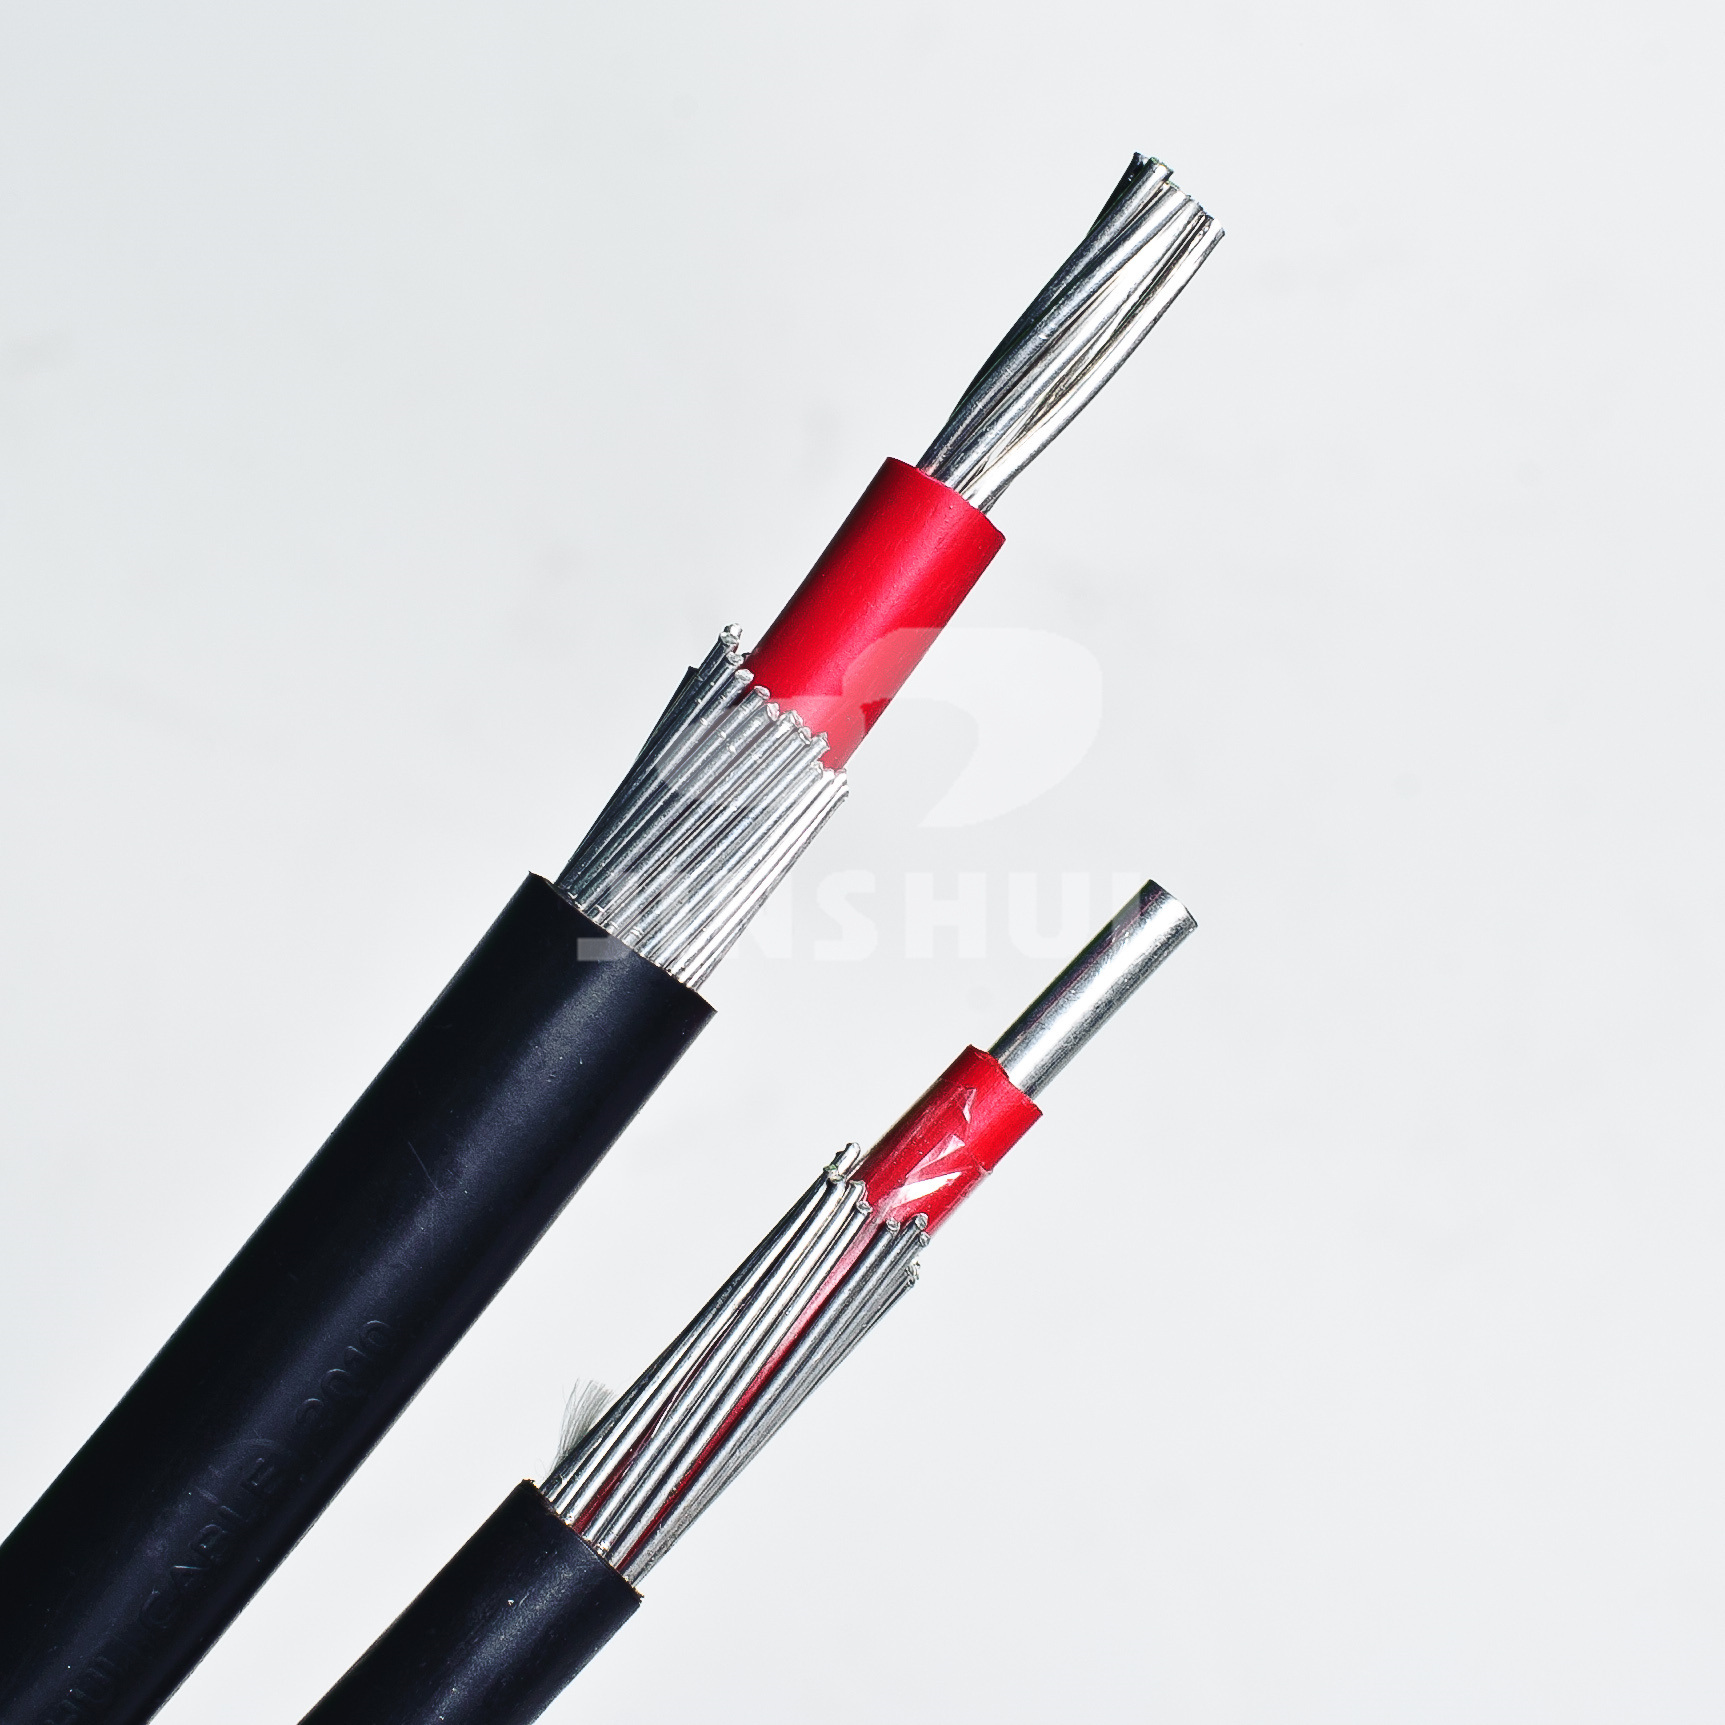 25mm² Split Concentric Cable Use for Construction Project